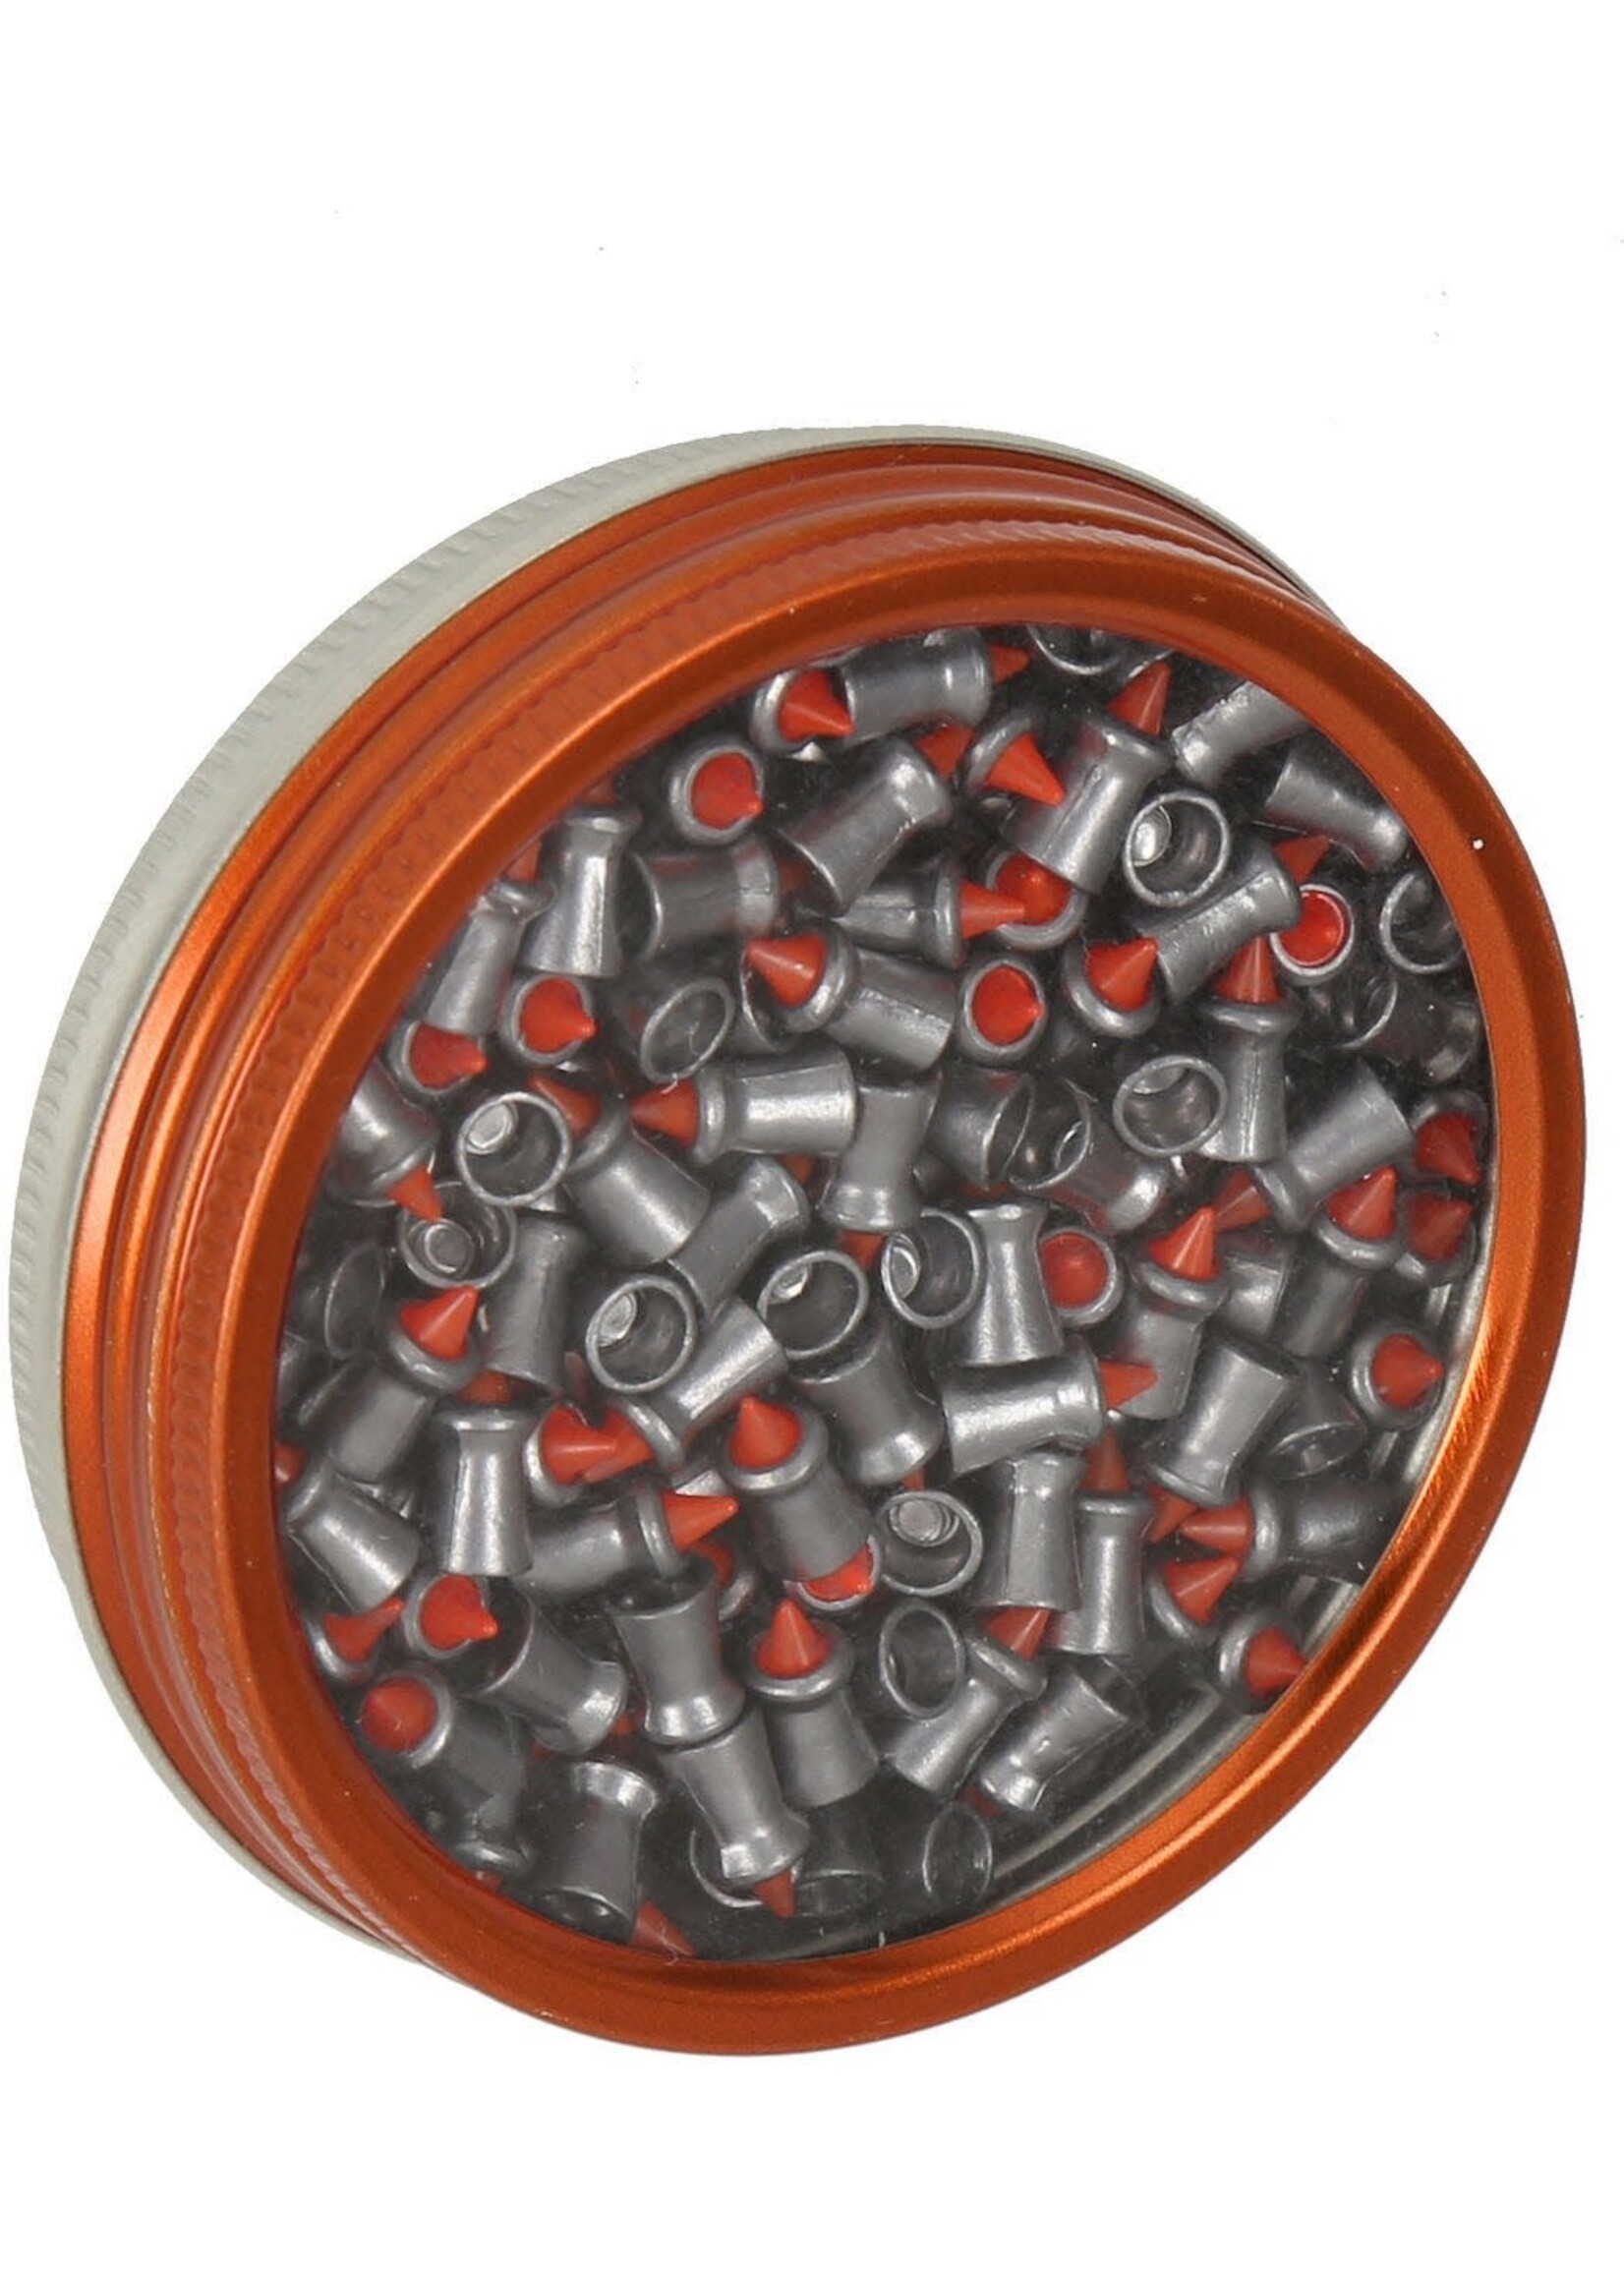 GAMO RED FIRE .177 CAL PELLETS - 150 COUNT